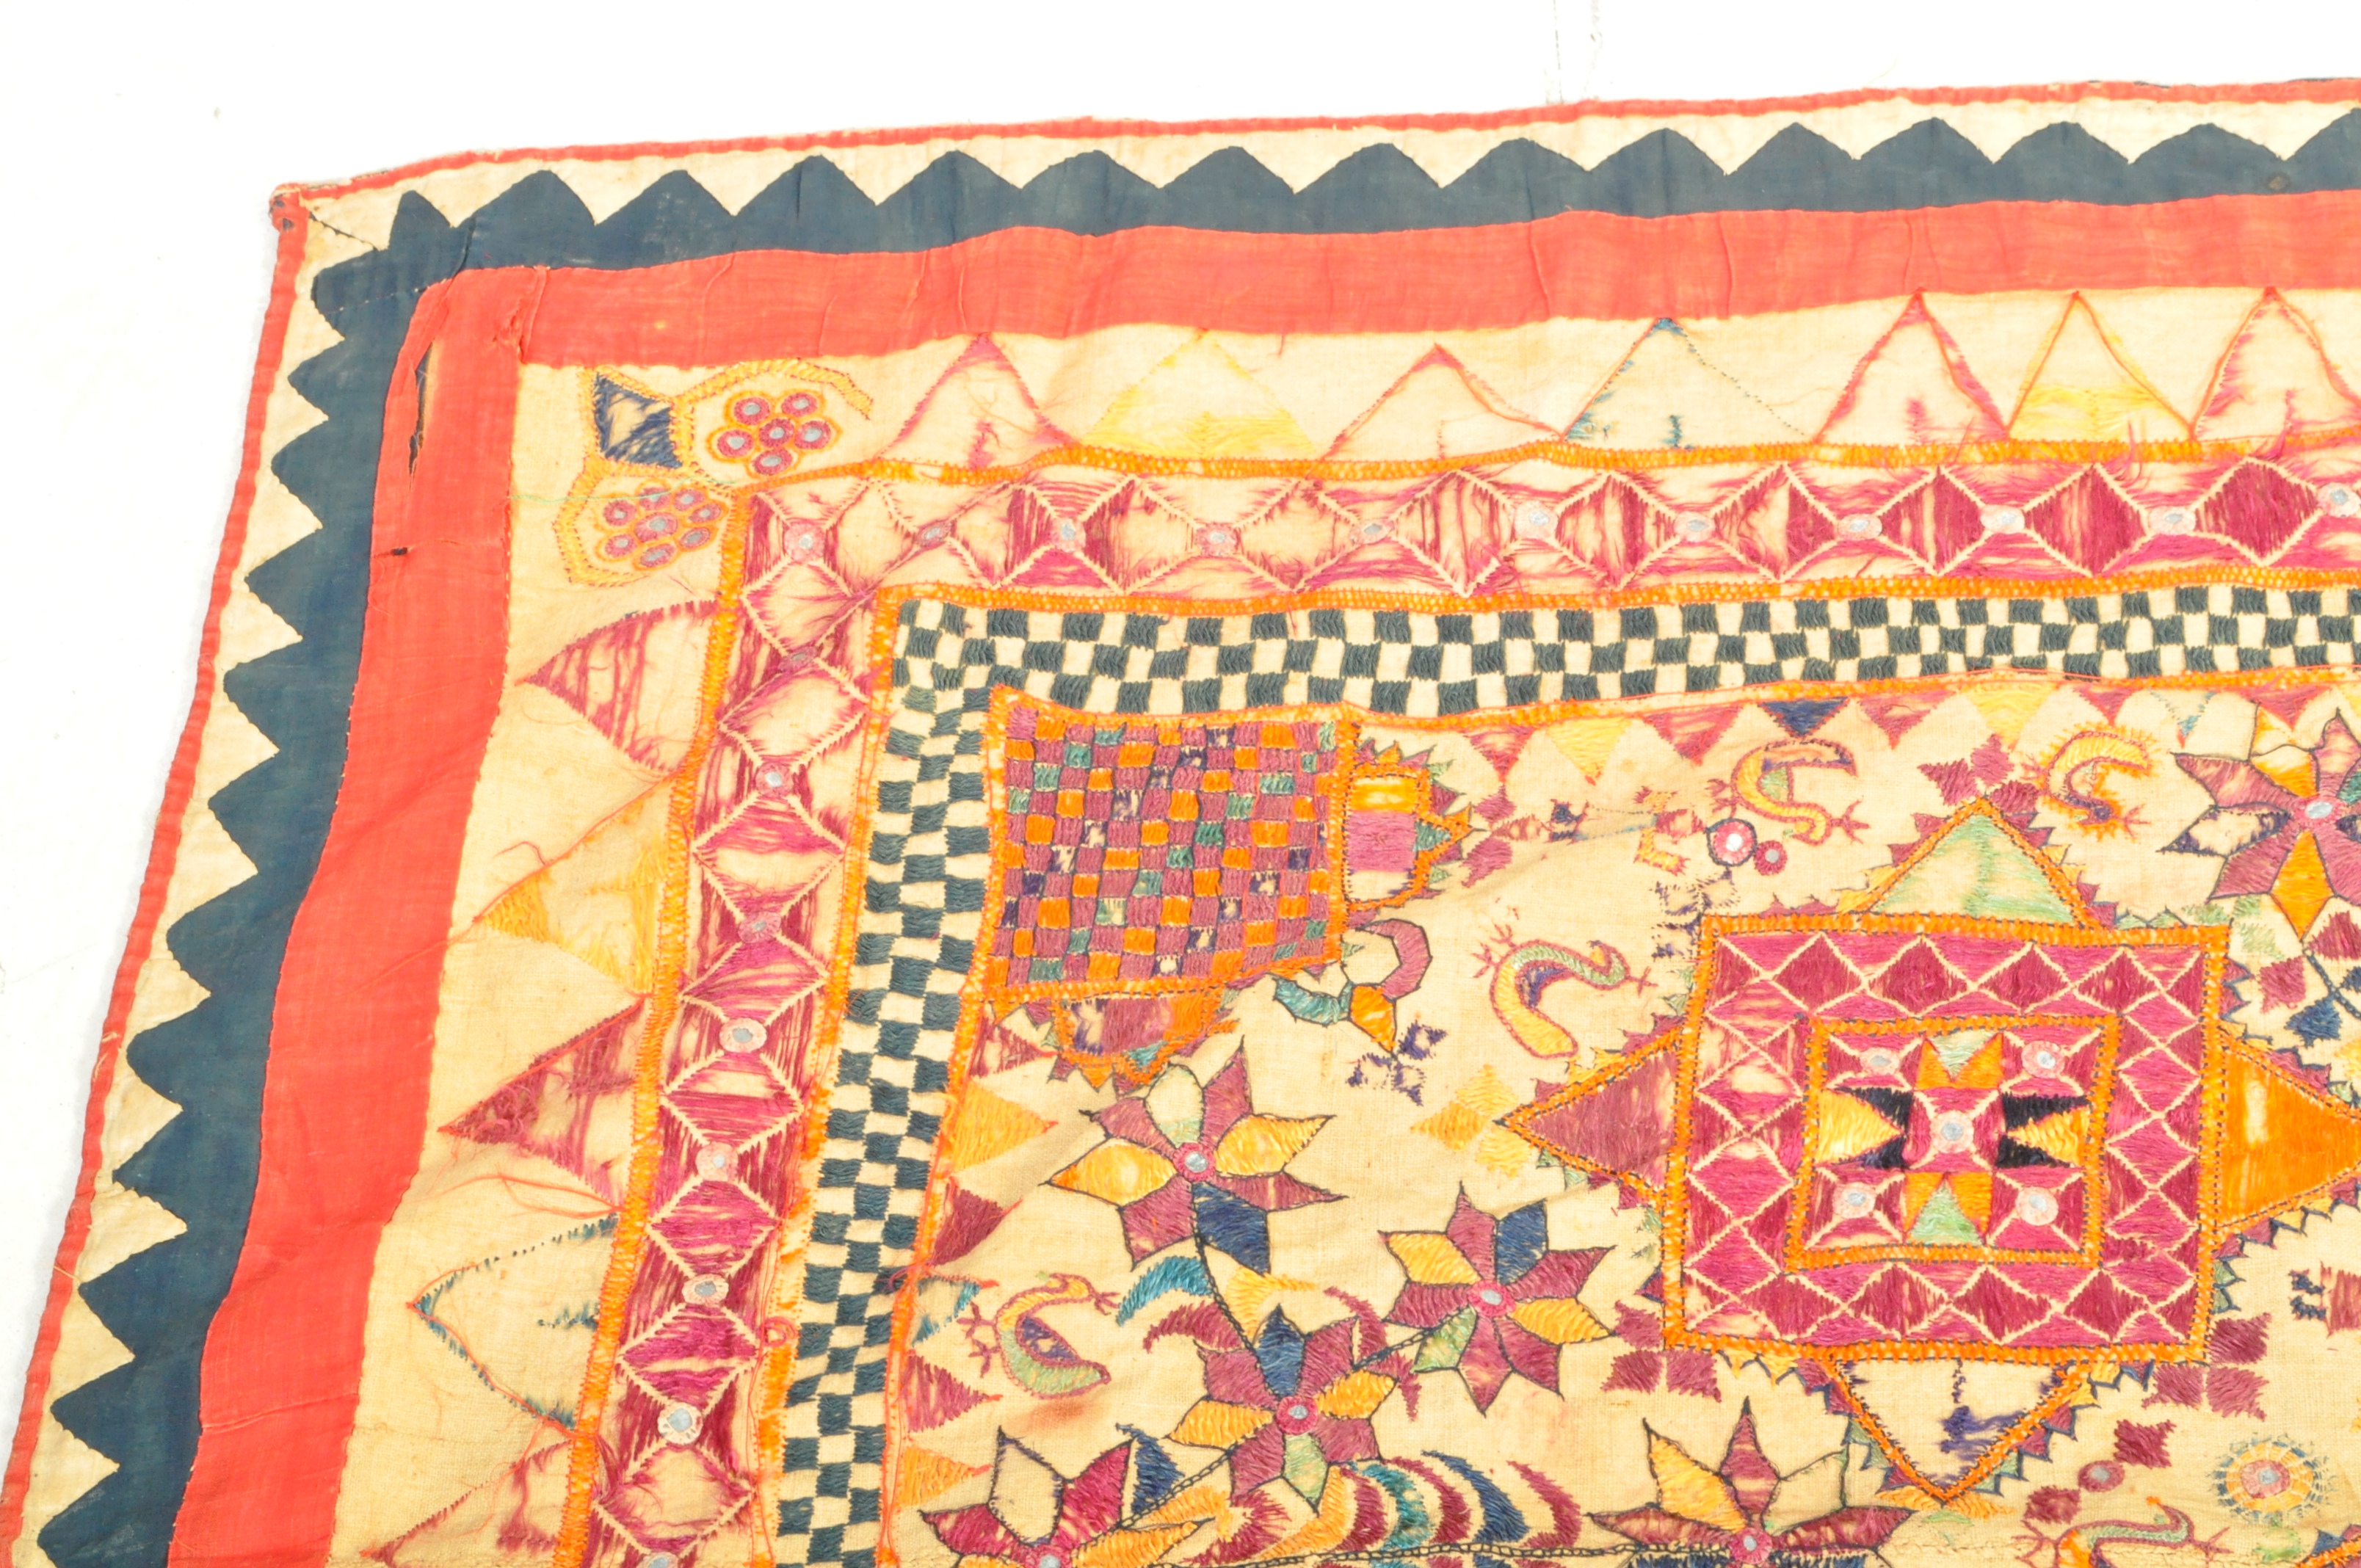 EARLY 20TH CENTURY INDIAN EMBROIDERED SHISHA TEXTILE - Image 2 of 7